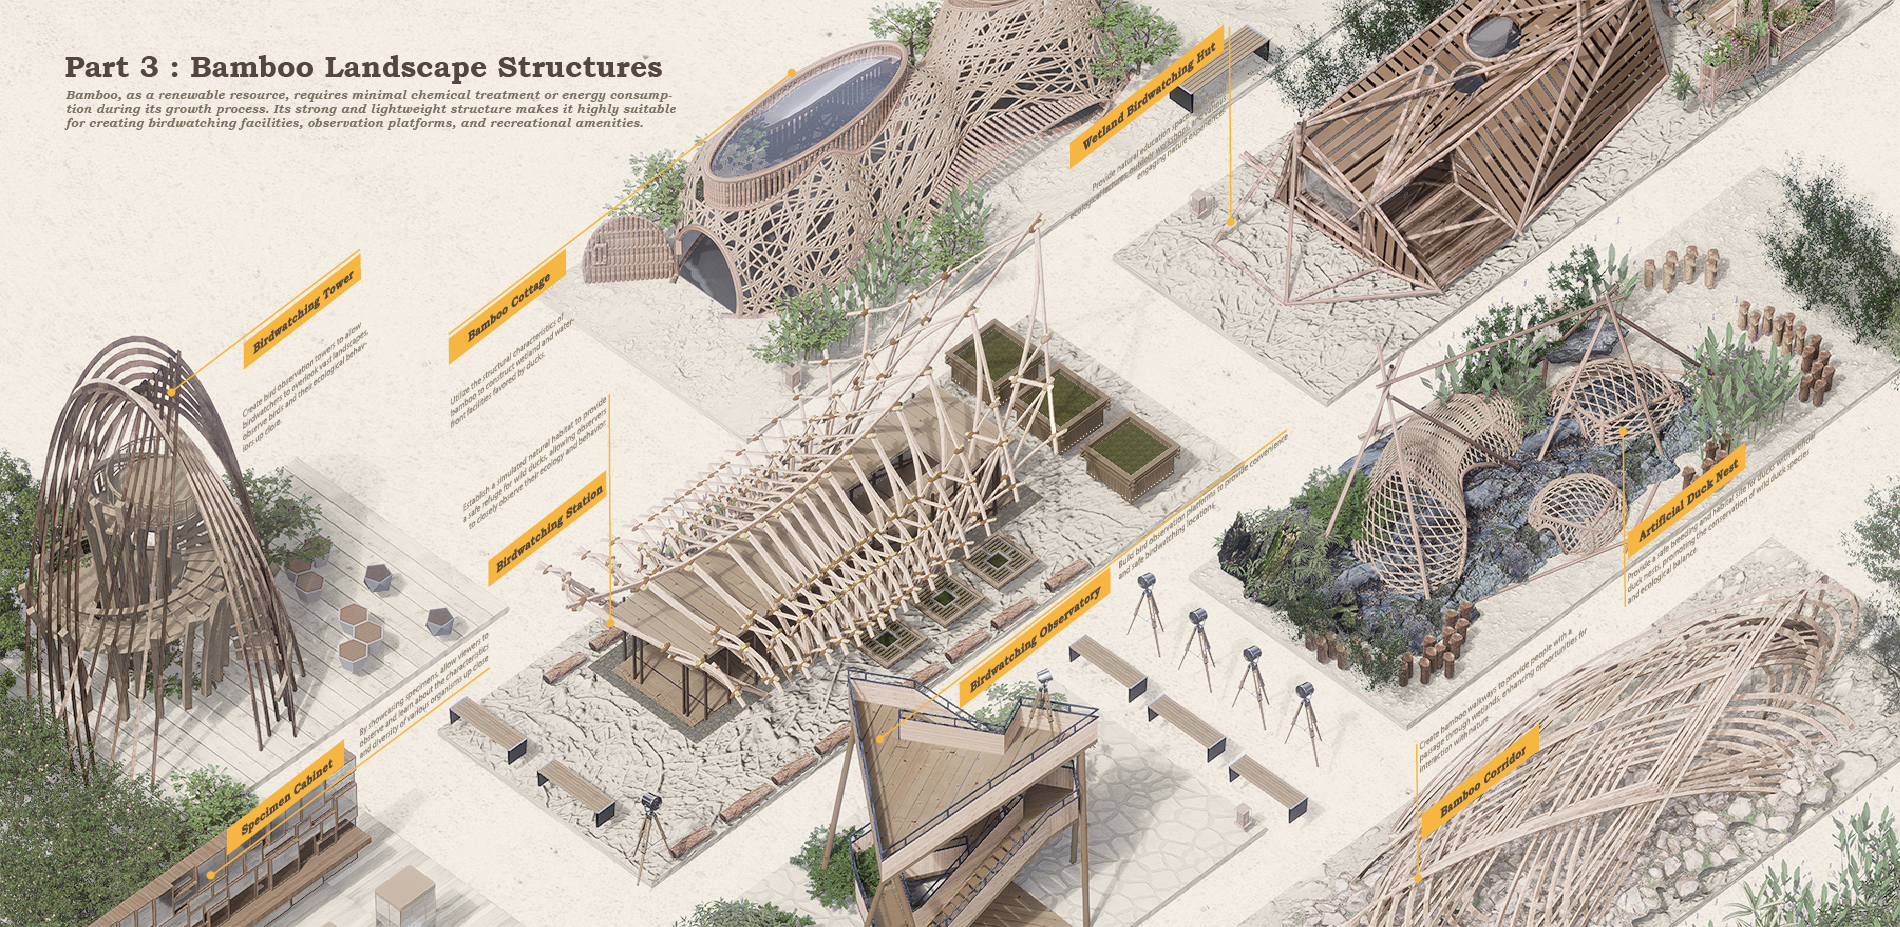 Part 3: Bamboo Landscapes Structures